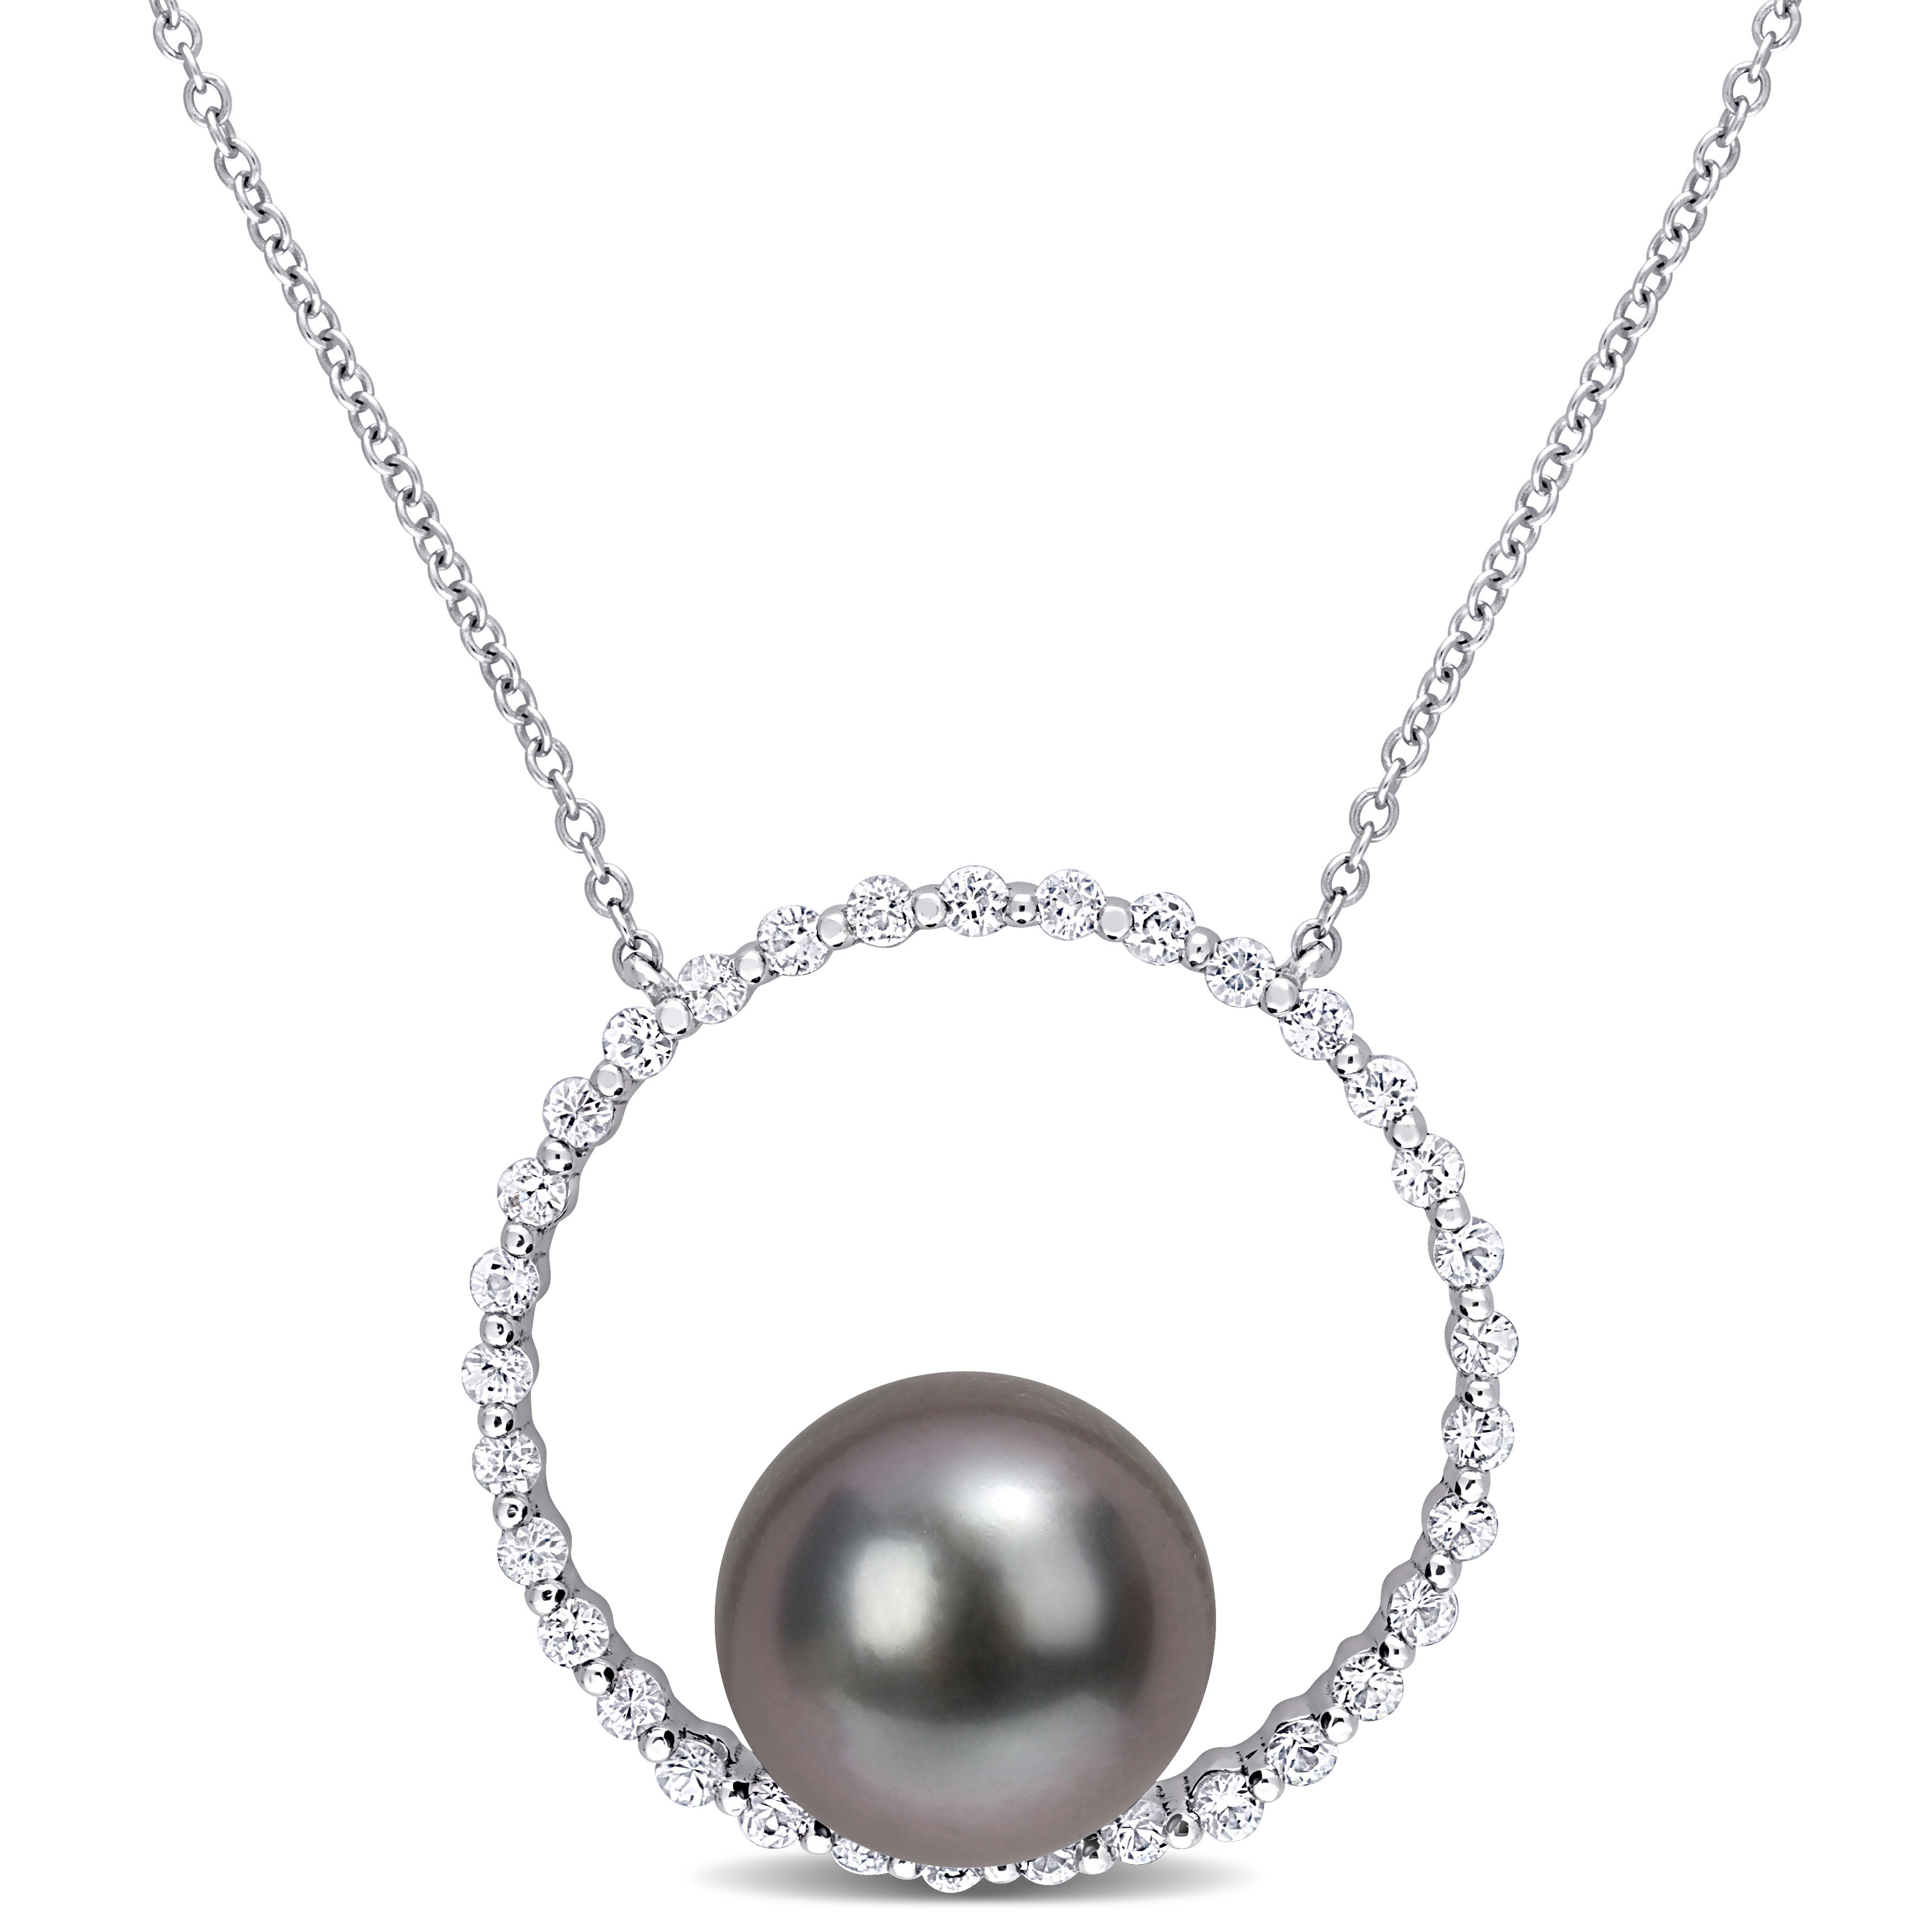 9.5-10 MM Black Tahitian Cultured Pearl and 1/2 CT TGW White Sapphire Circular Pendant with Chain in 10k White Gold